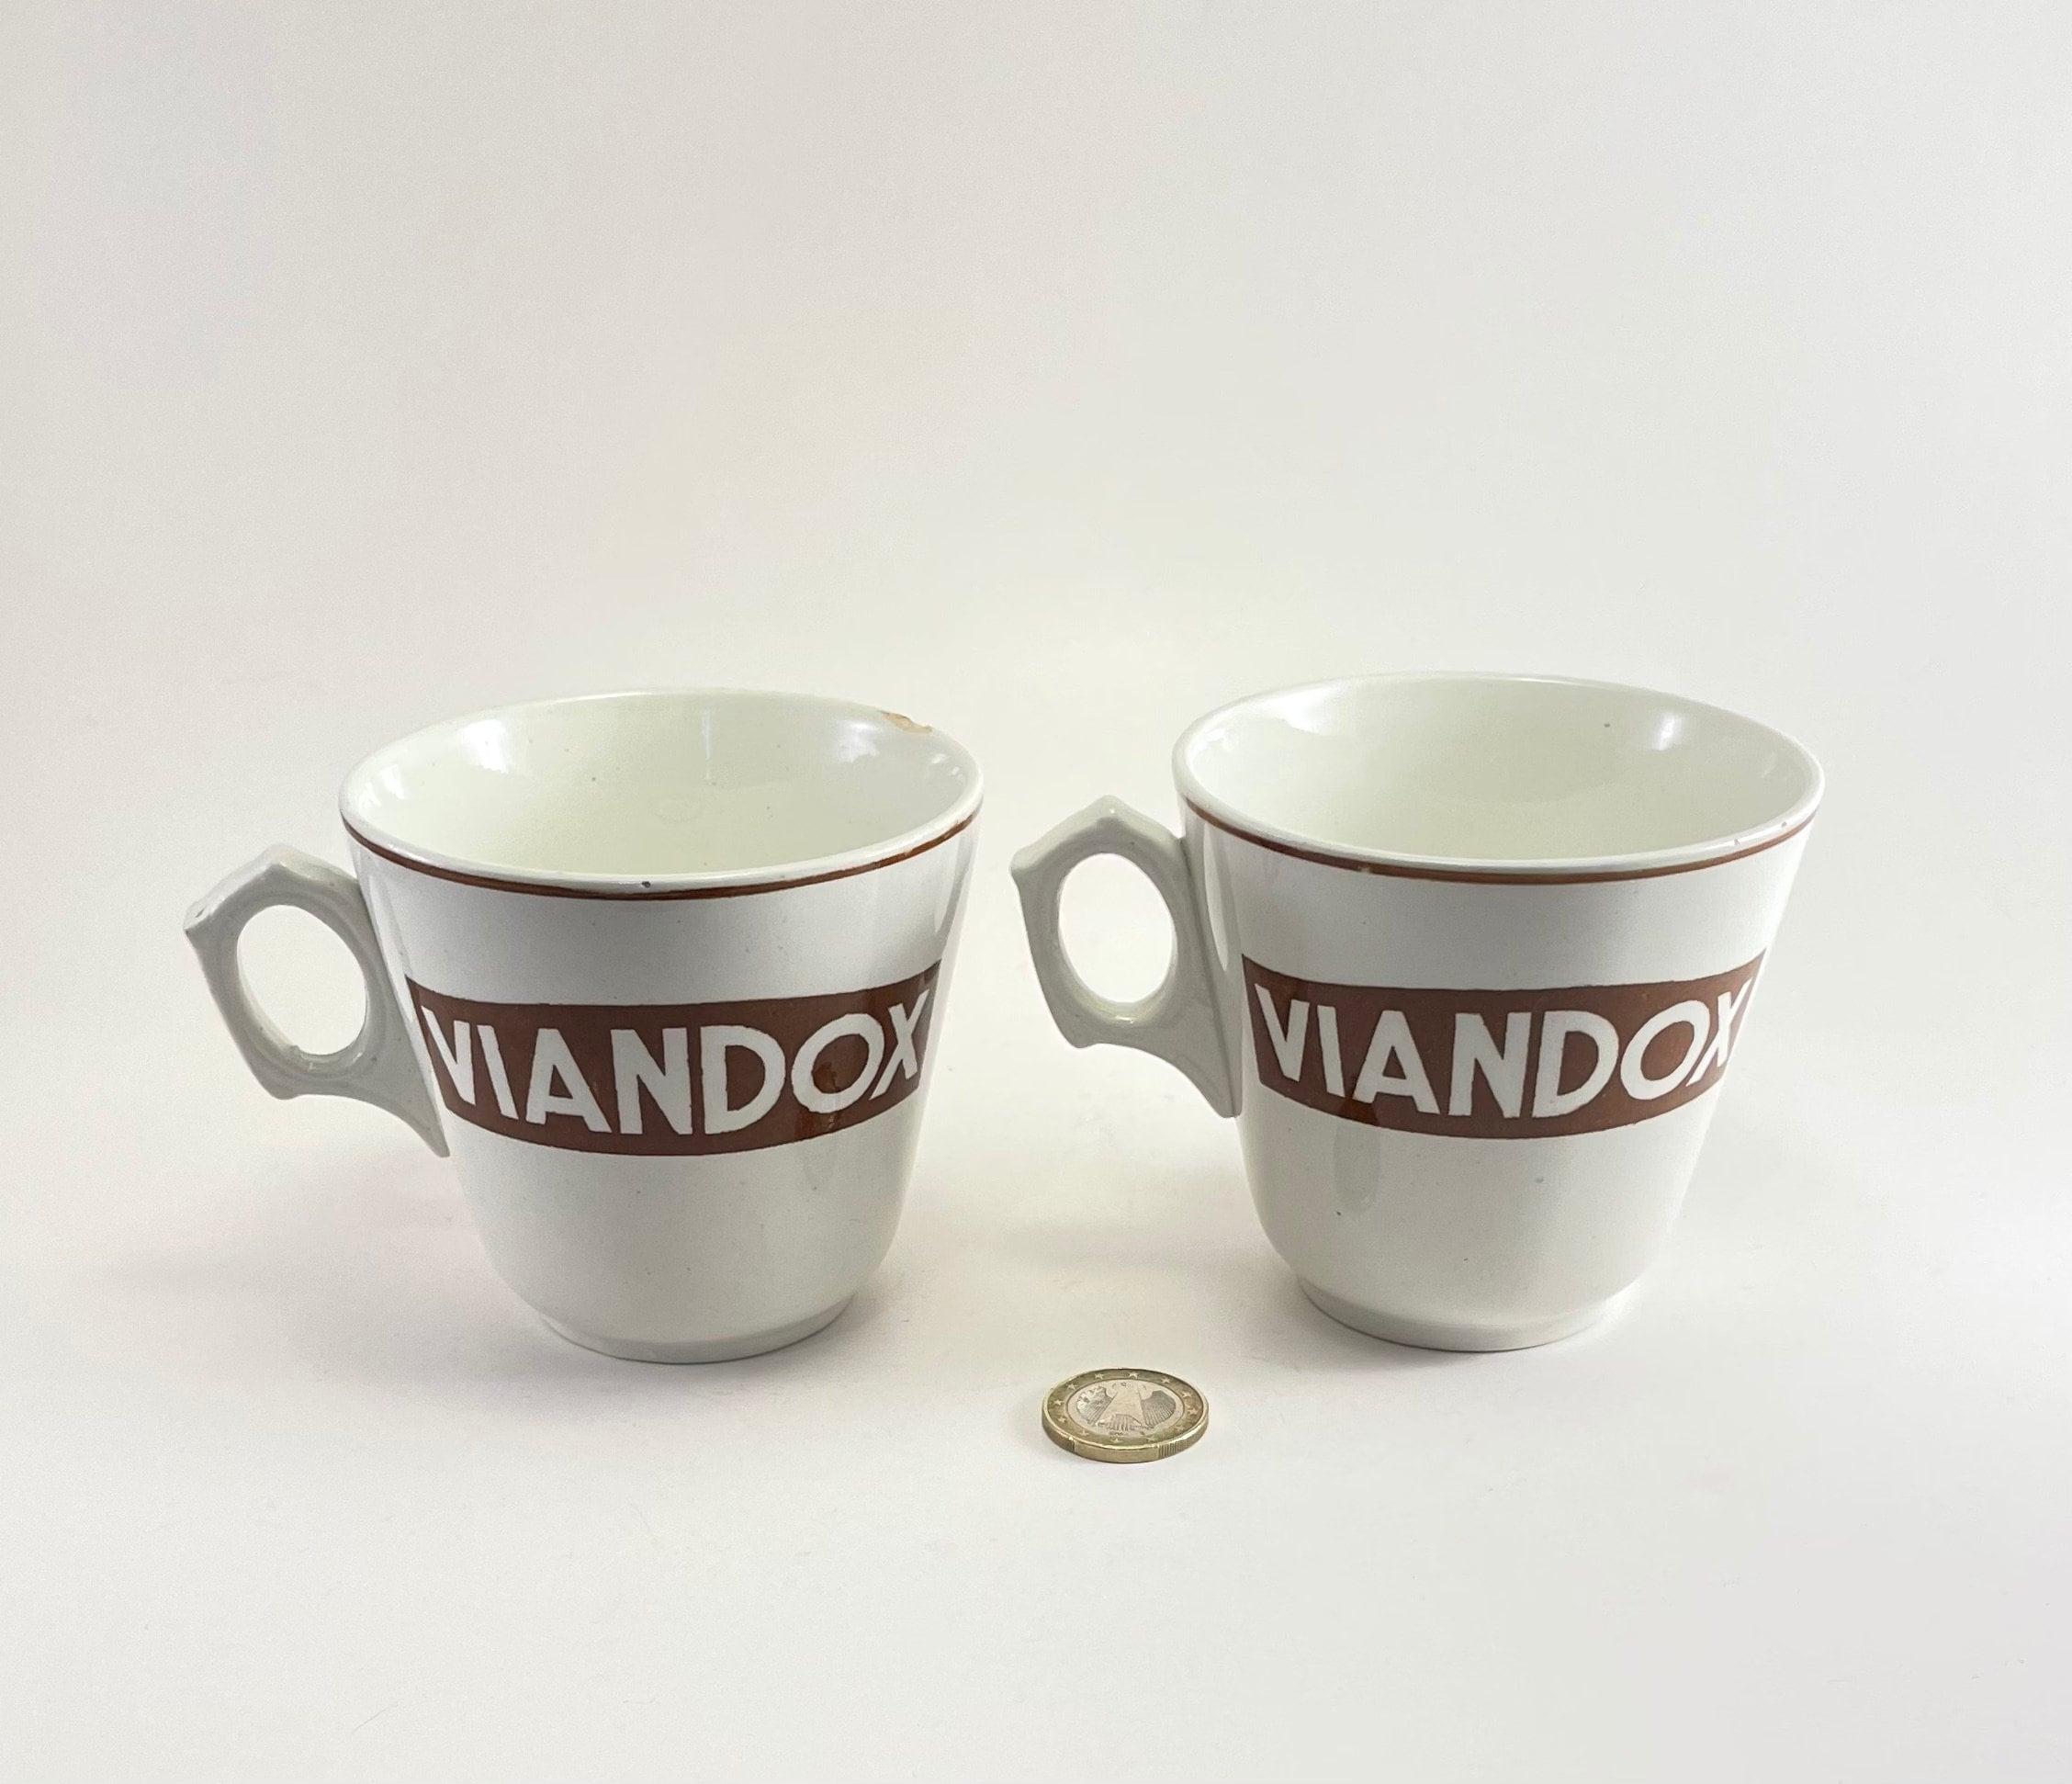 Old and Rare Advertising Cups of the Brand VIANDOX in Faience x2 -   Denmark